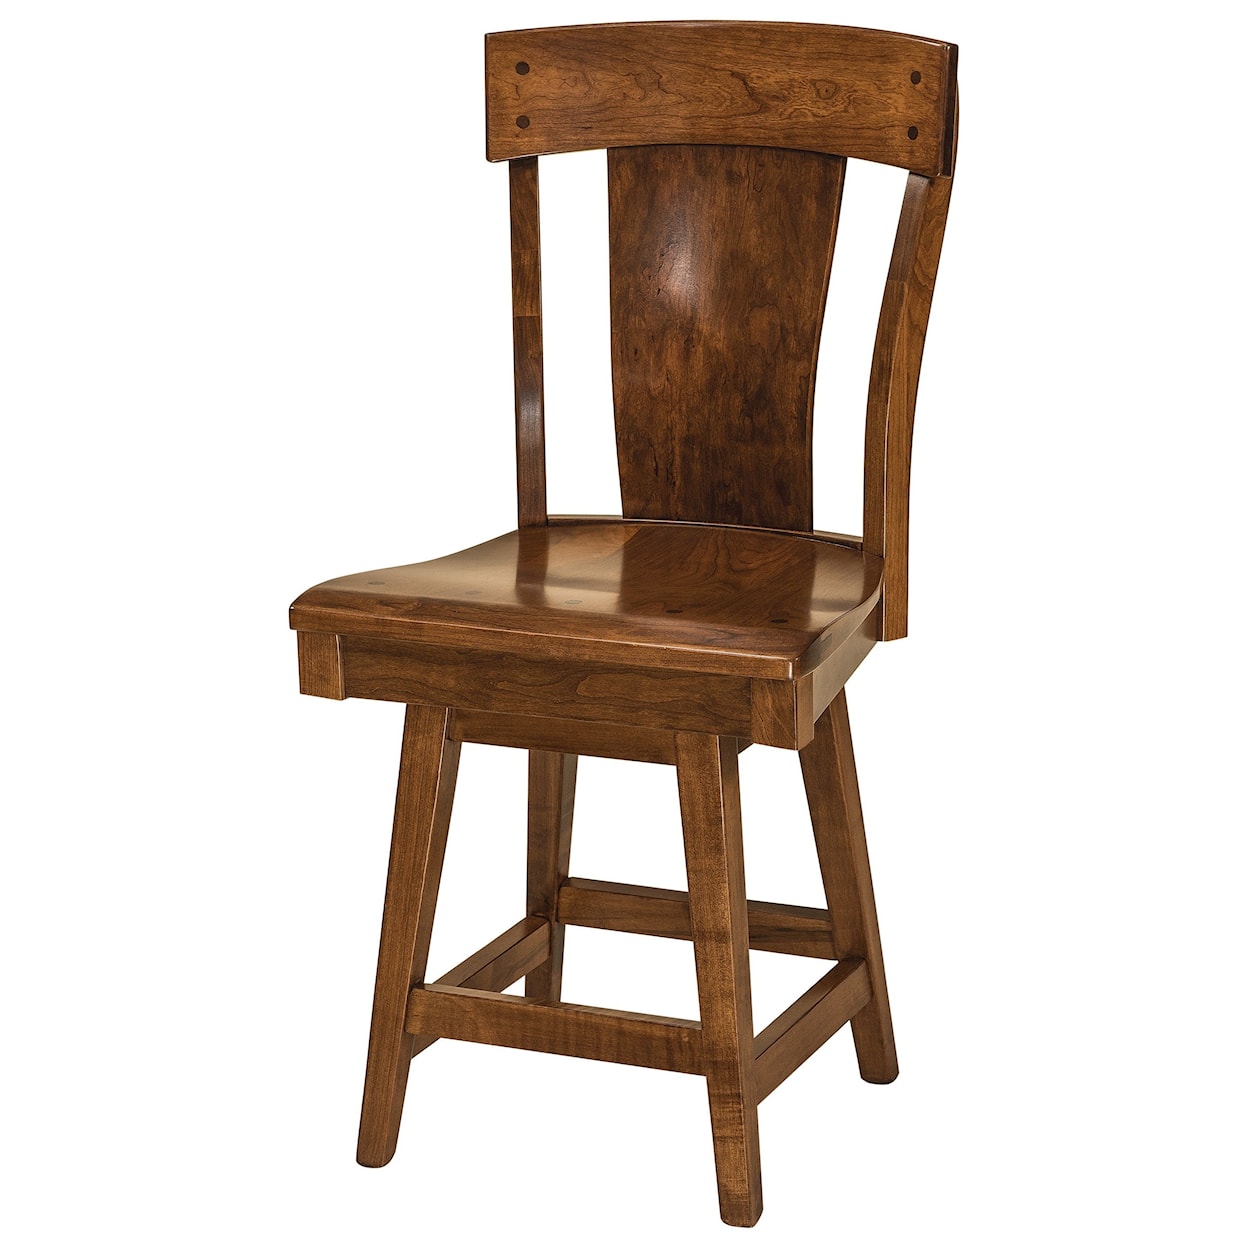 F&N Woodworking Lacombe Swivel Bar Height Stool - Leather Seat